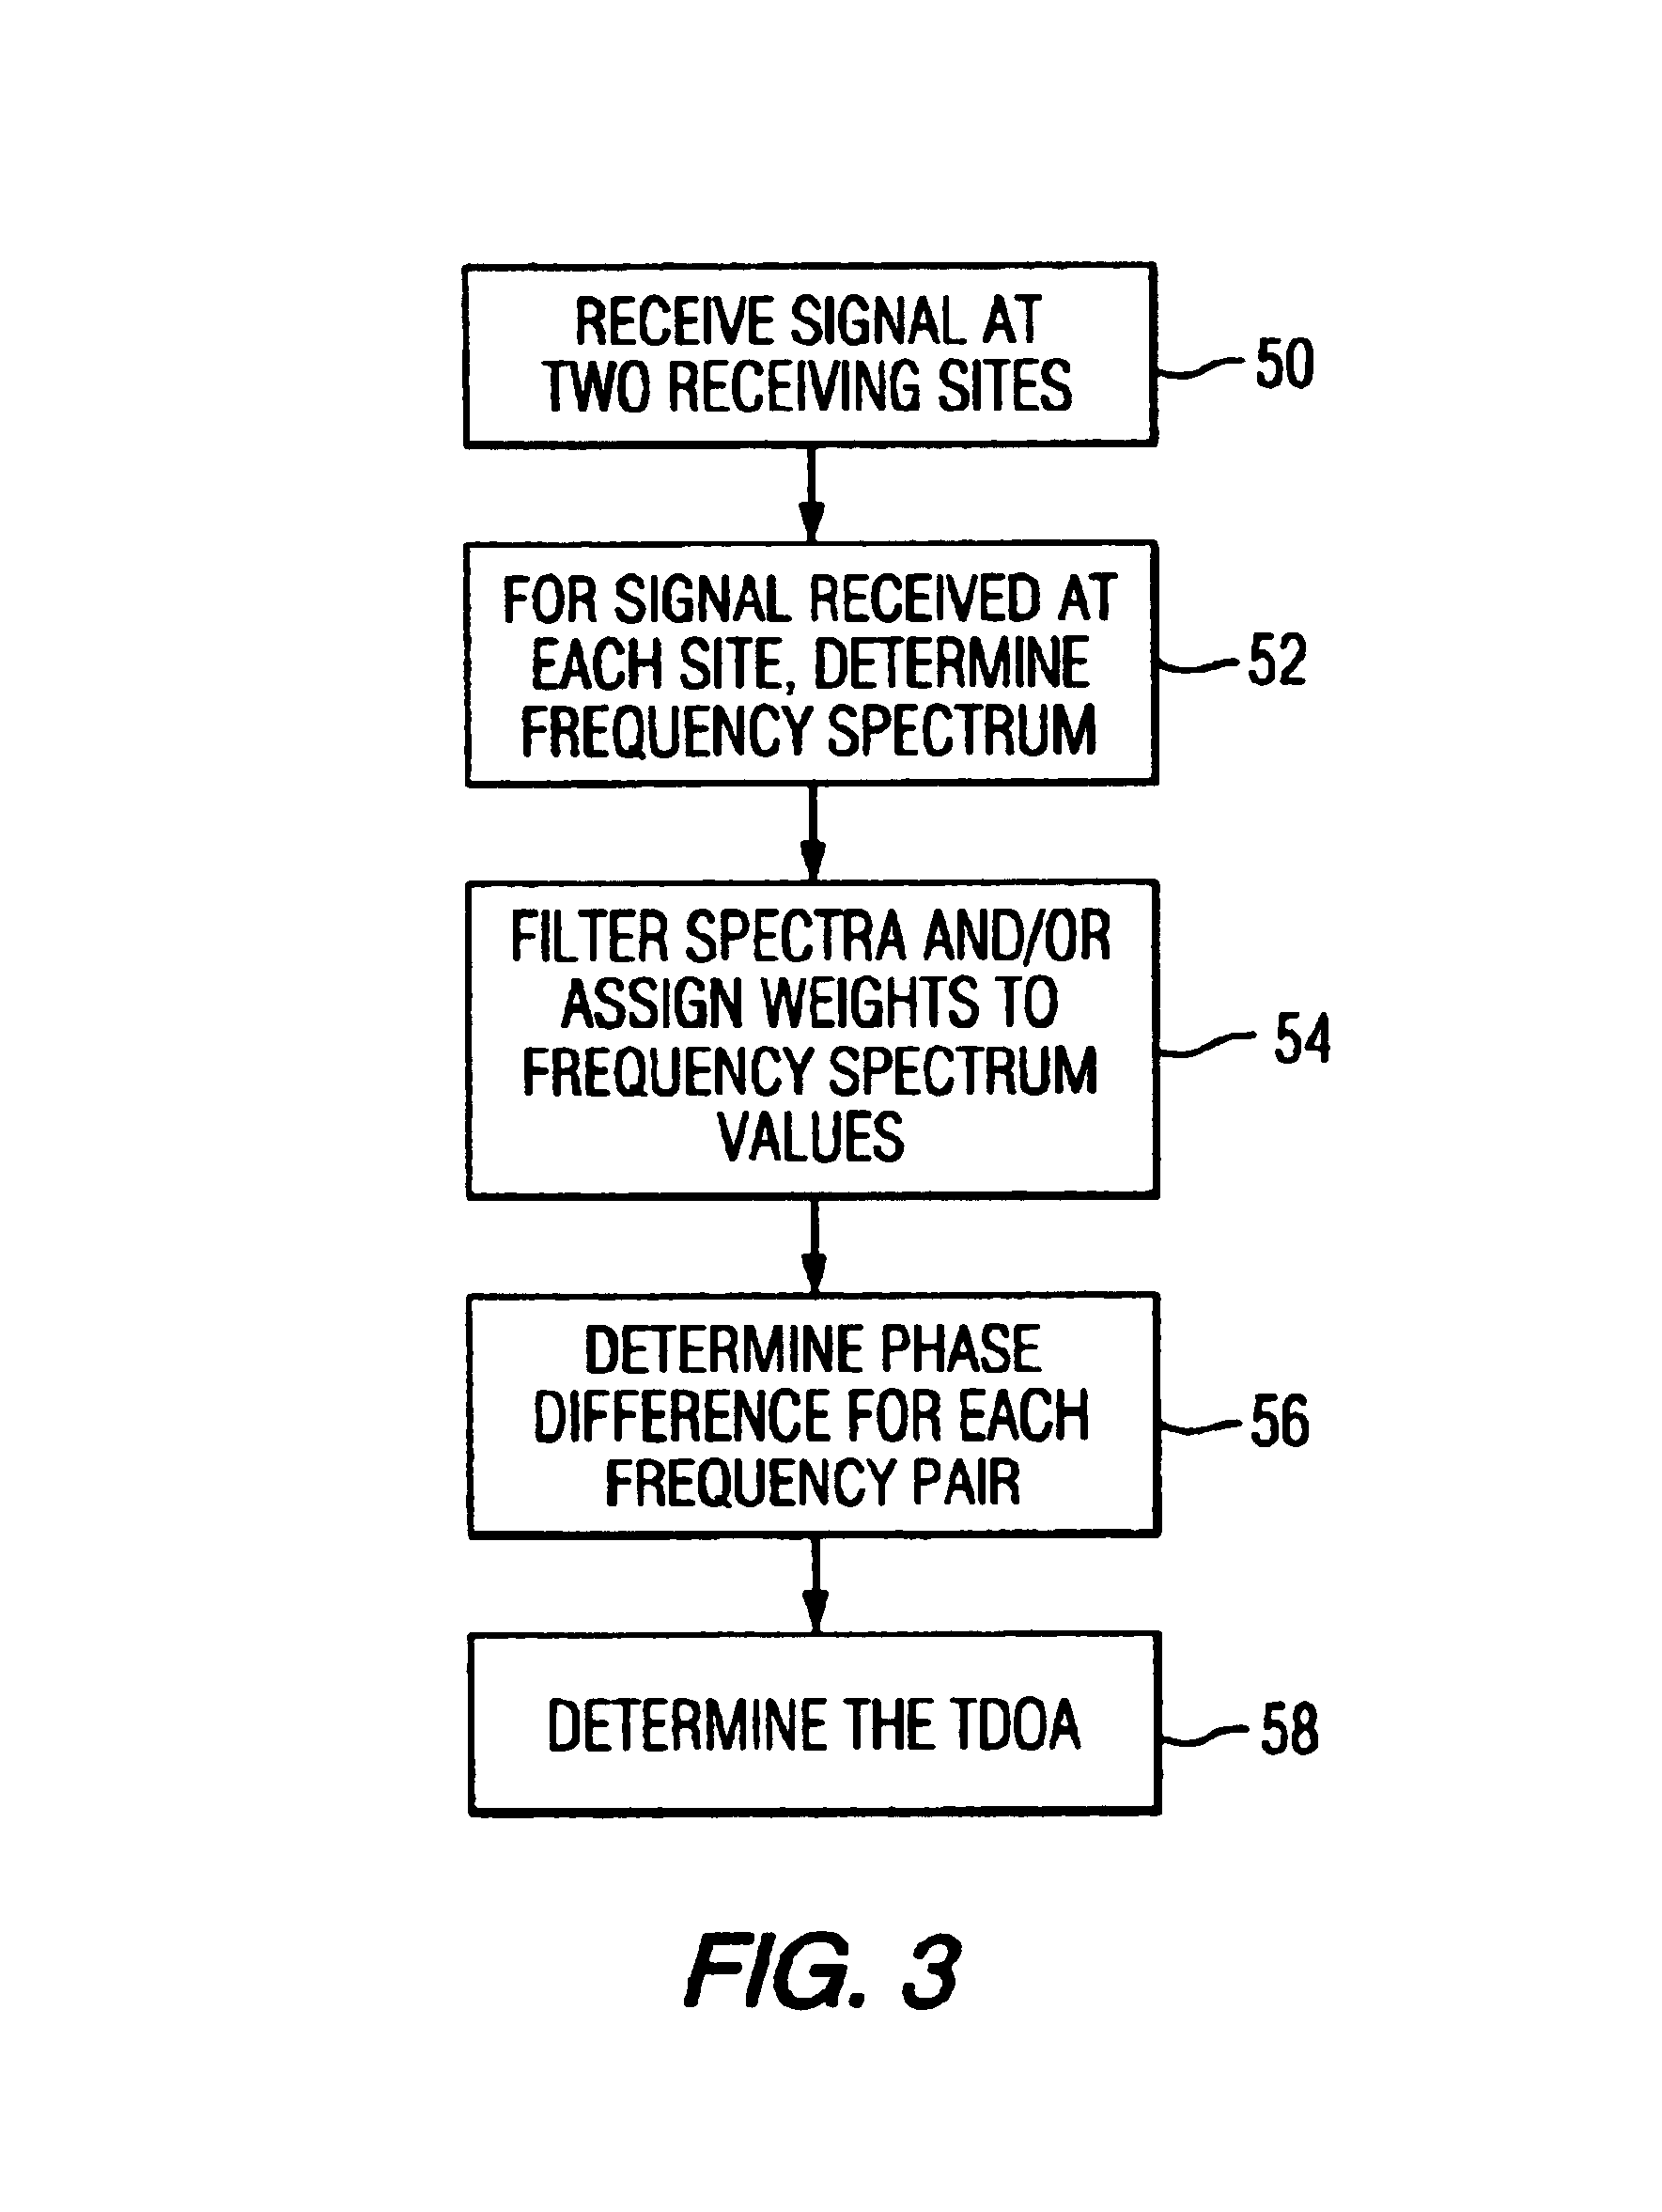 Method and apparatus for geolocating a wireless communications device